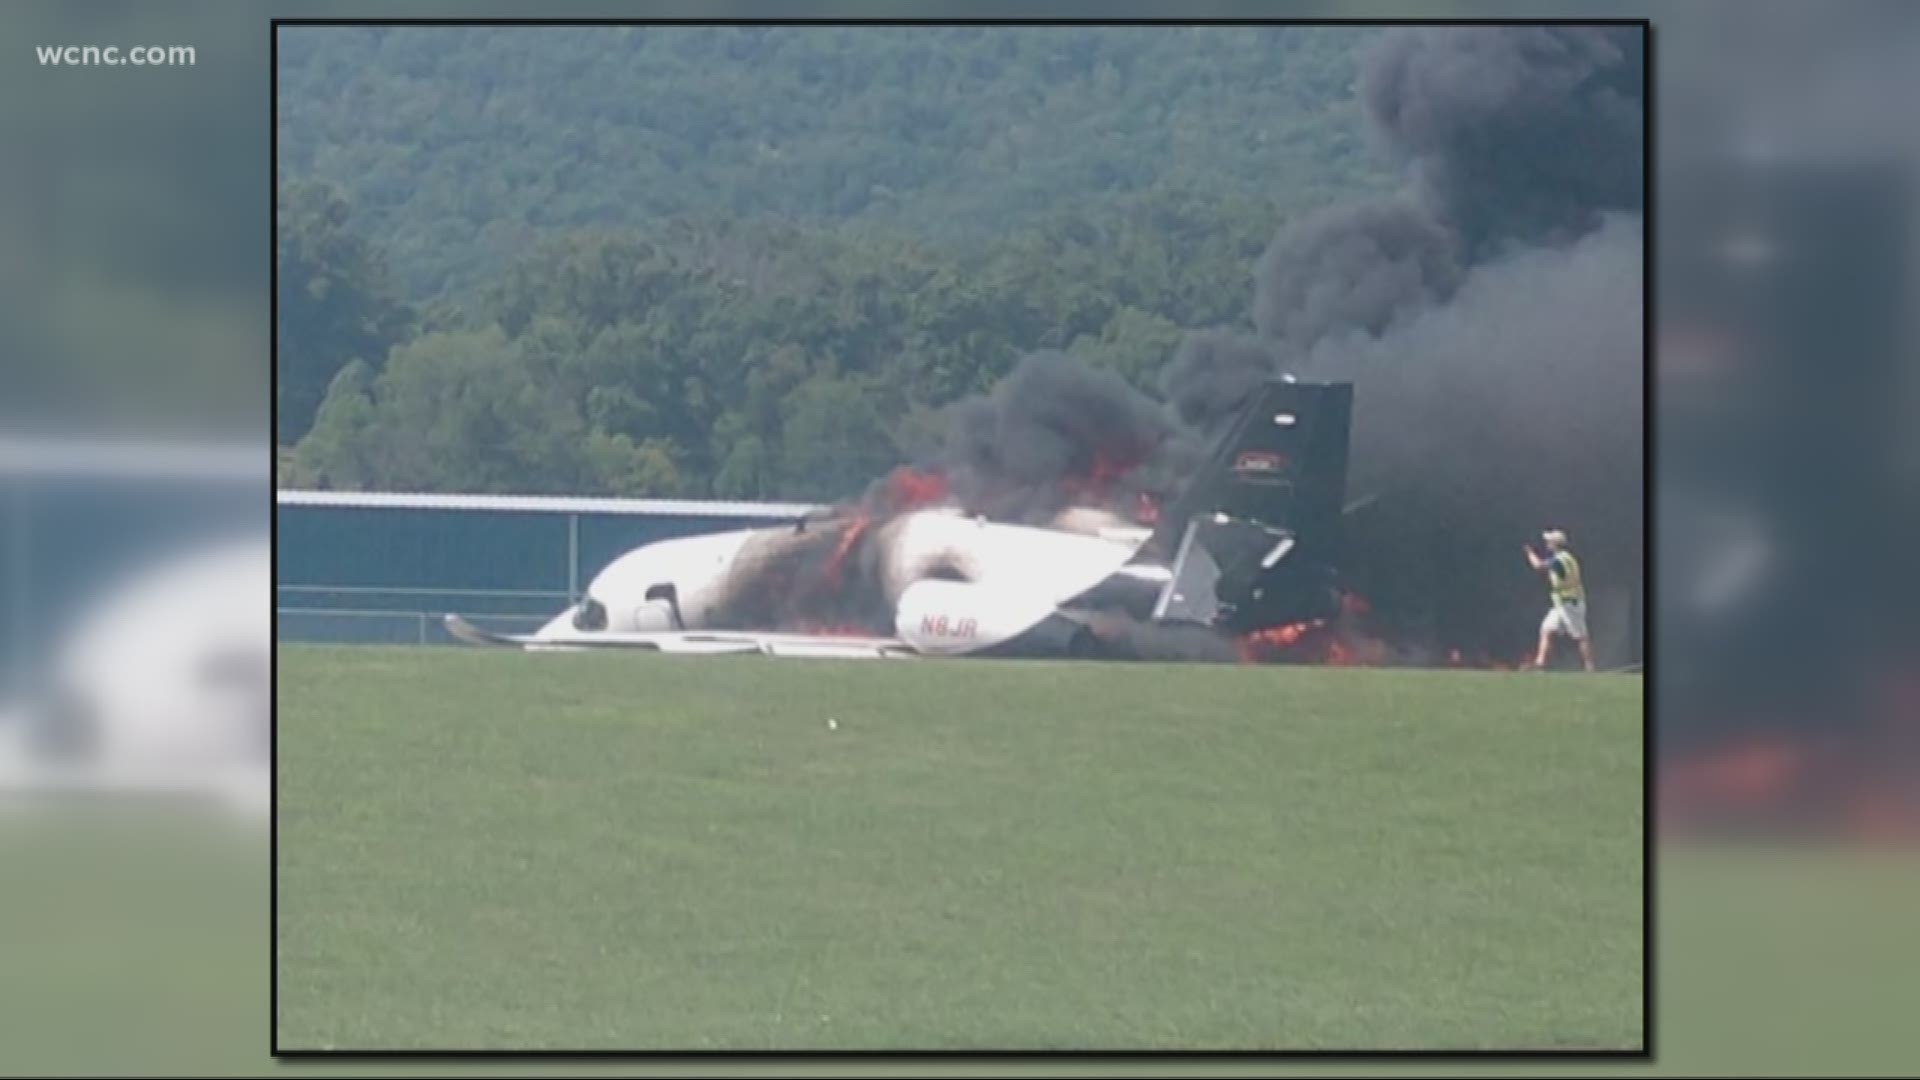 Earnhardt Jr. and his wife Amy involved in a plane crashed. The Elizabethton fire chief says no one was killed and Earnhardt Jr. was taken to the hospital.